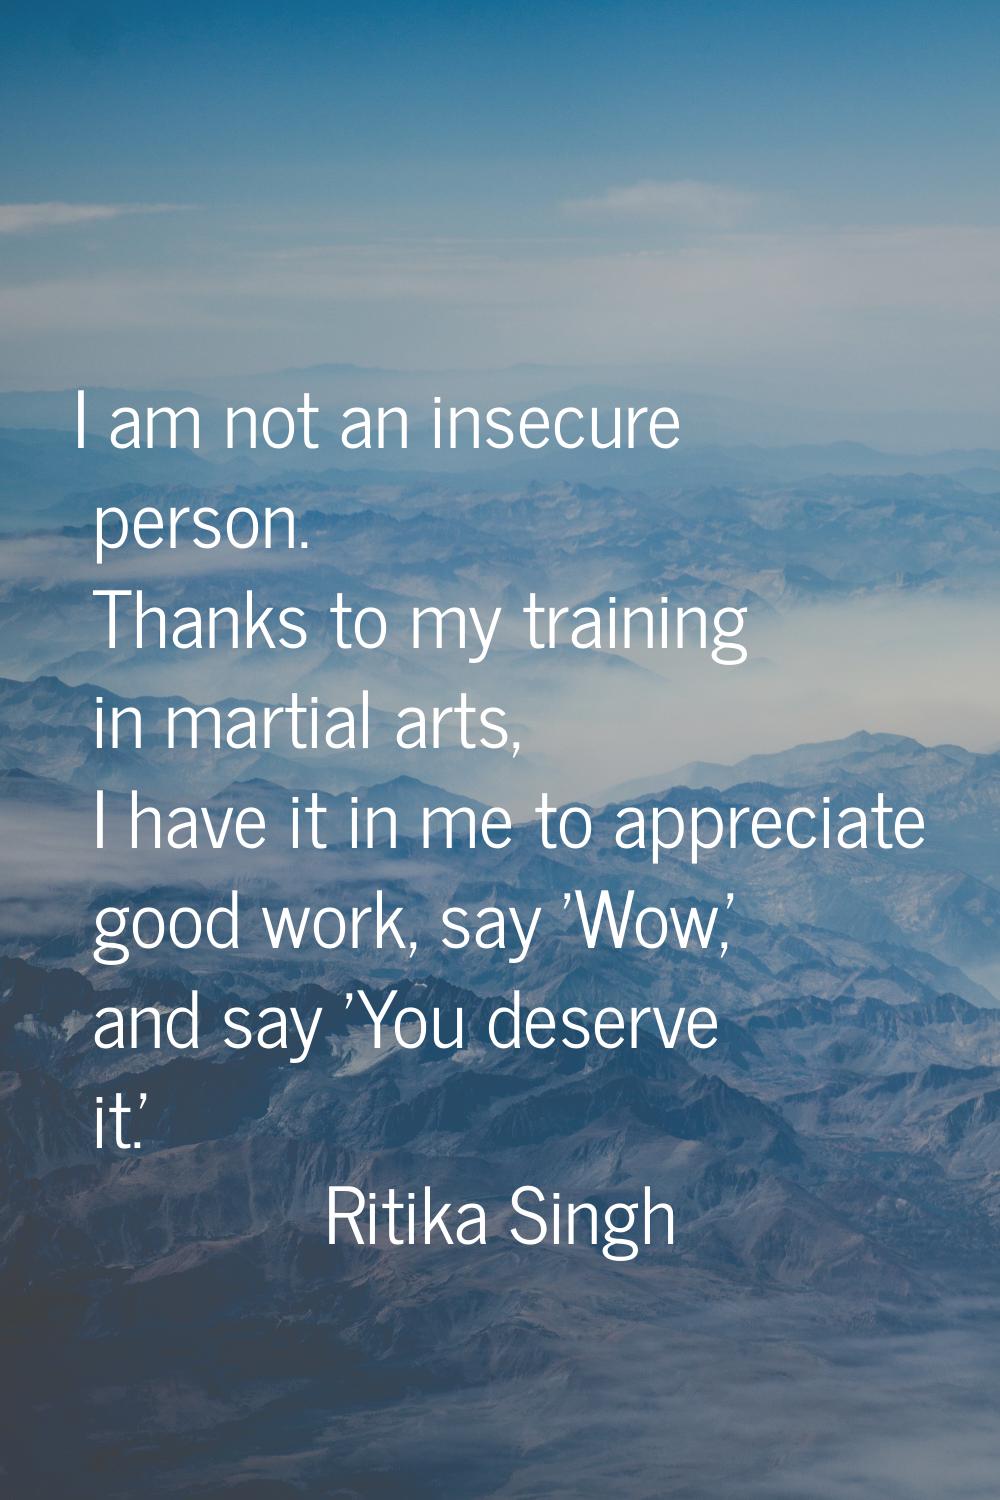 I am not an insecure person. Thanks to my training in martial arts, I have it in me to appreciate g